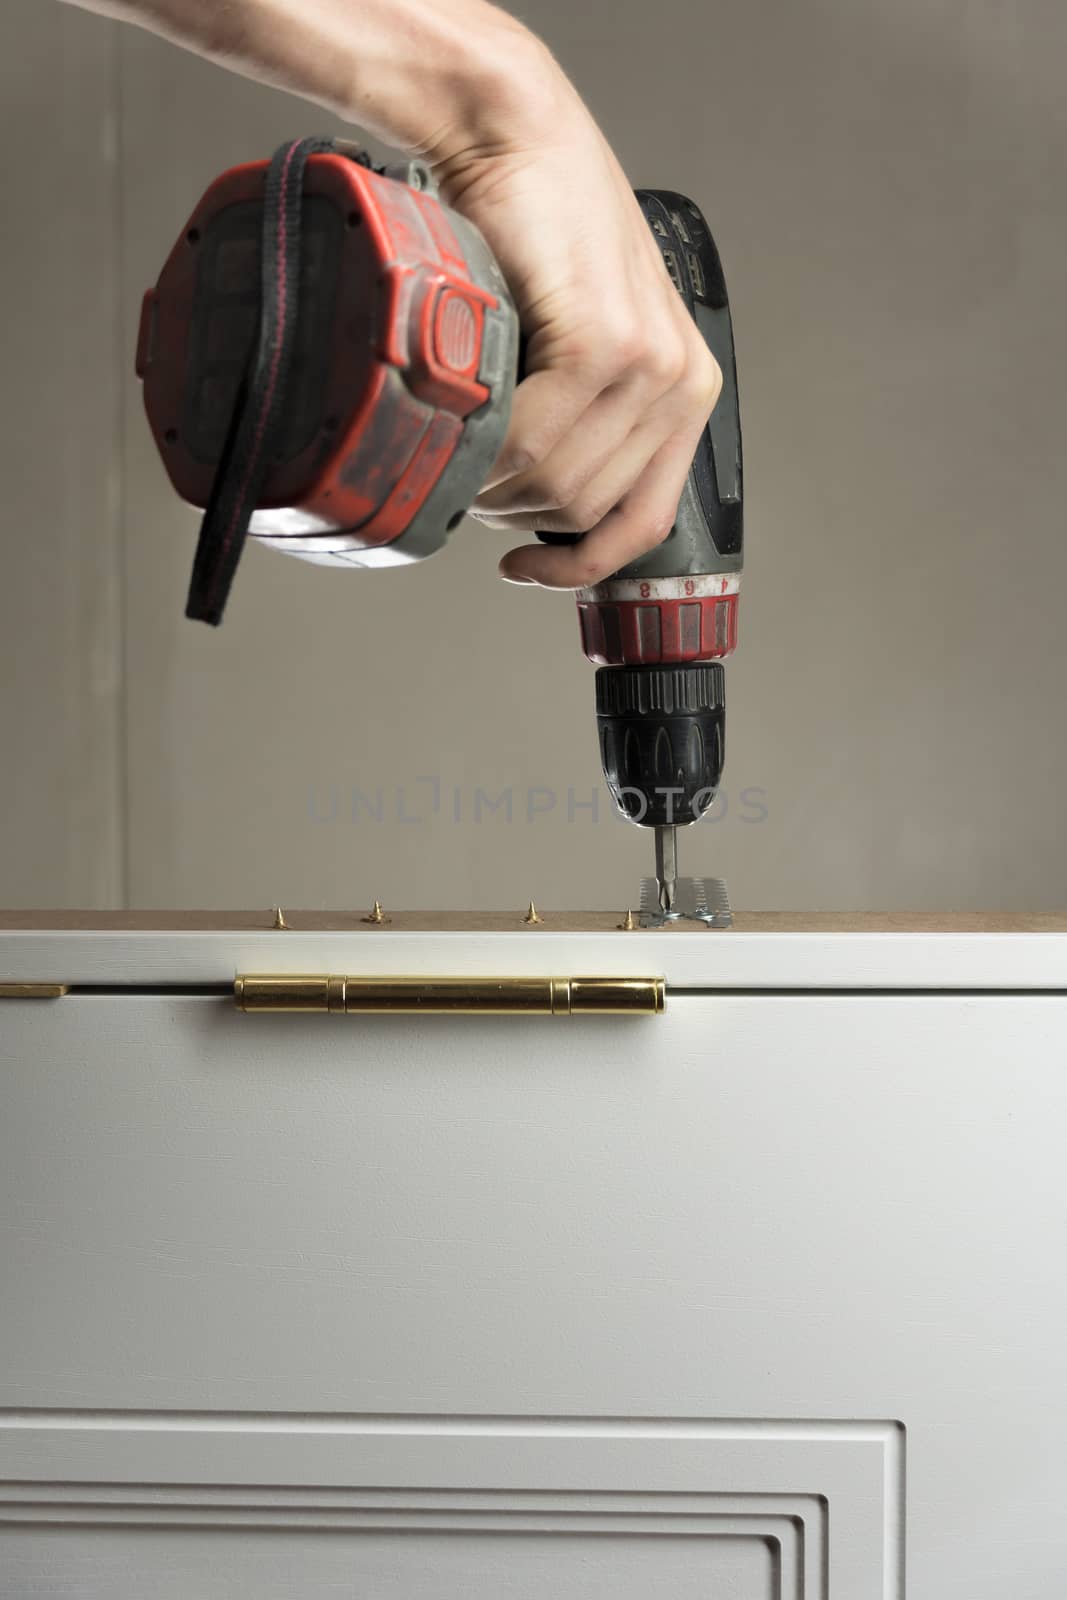 A worker twists a screw into the Board with a drill. The handyman does housework and improves the dwelling. Photographed vertically